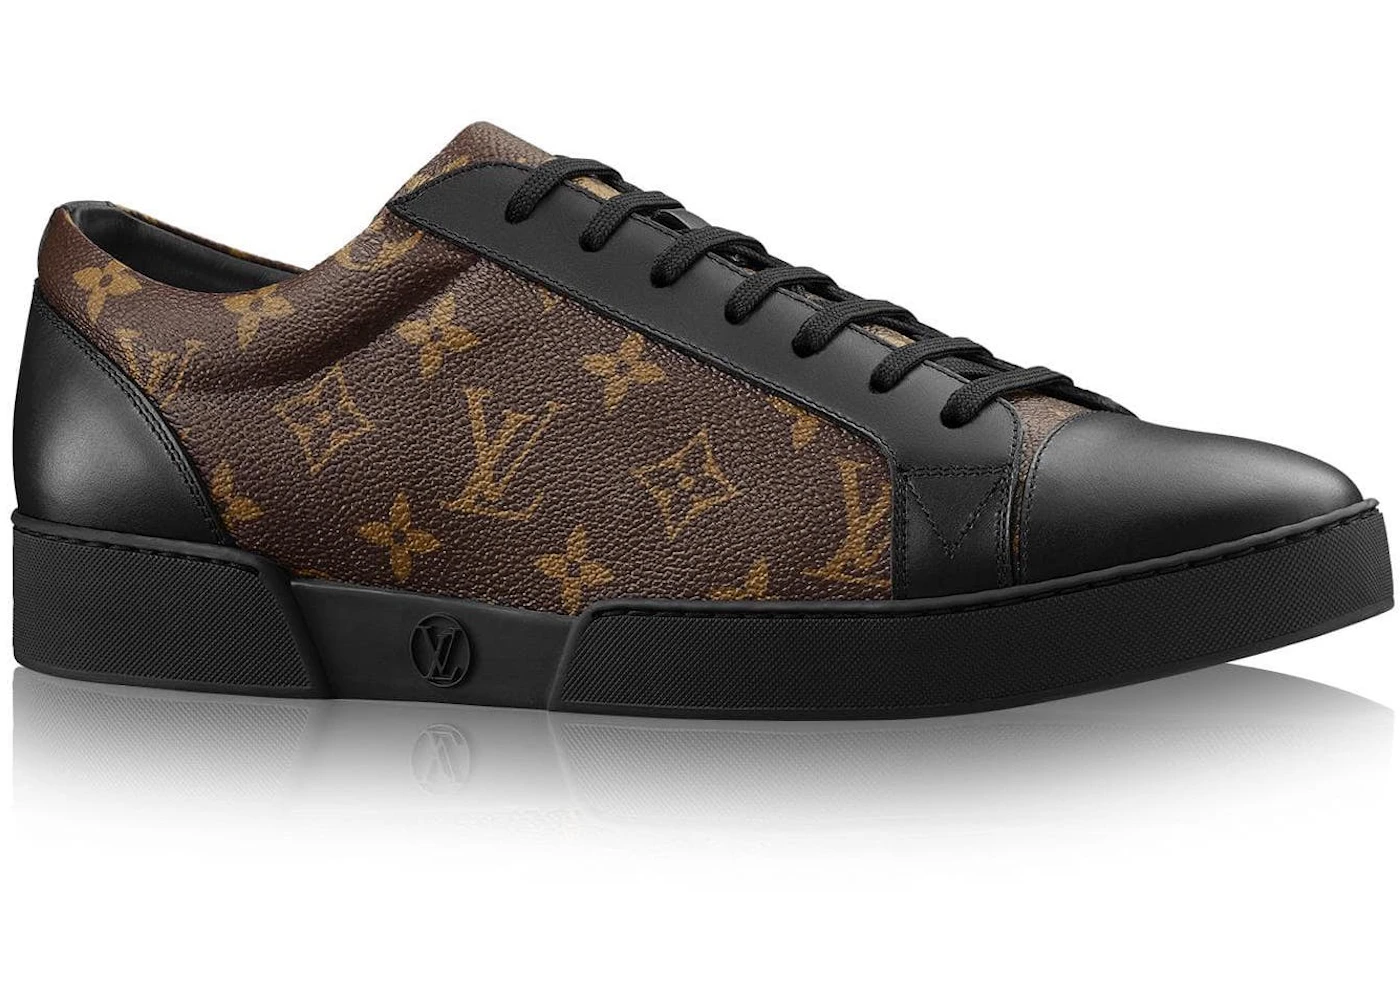 Louis Vuitton Monogram Sneakers Brown Match-Up US 9.5 Size